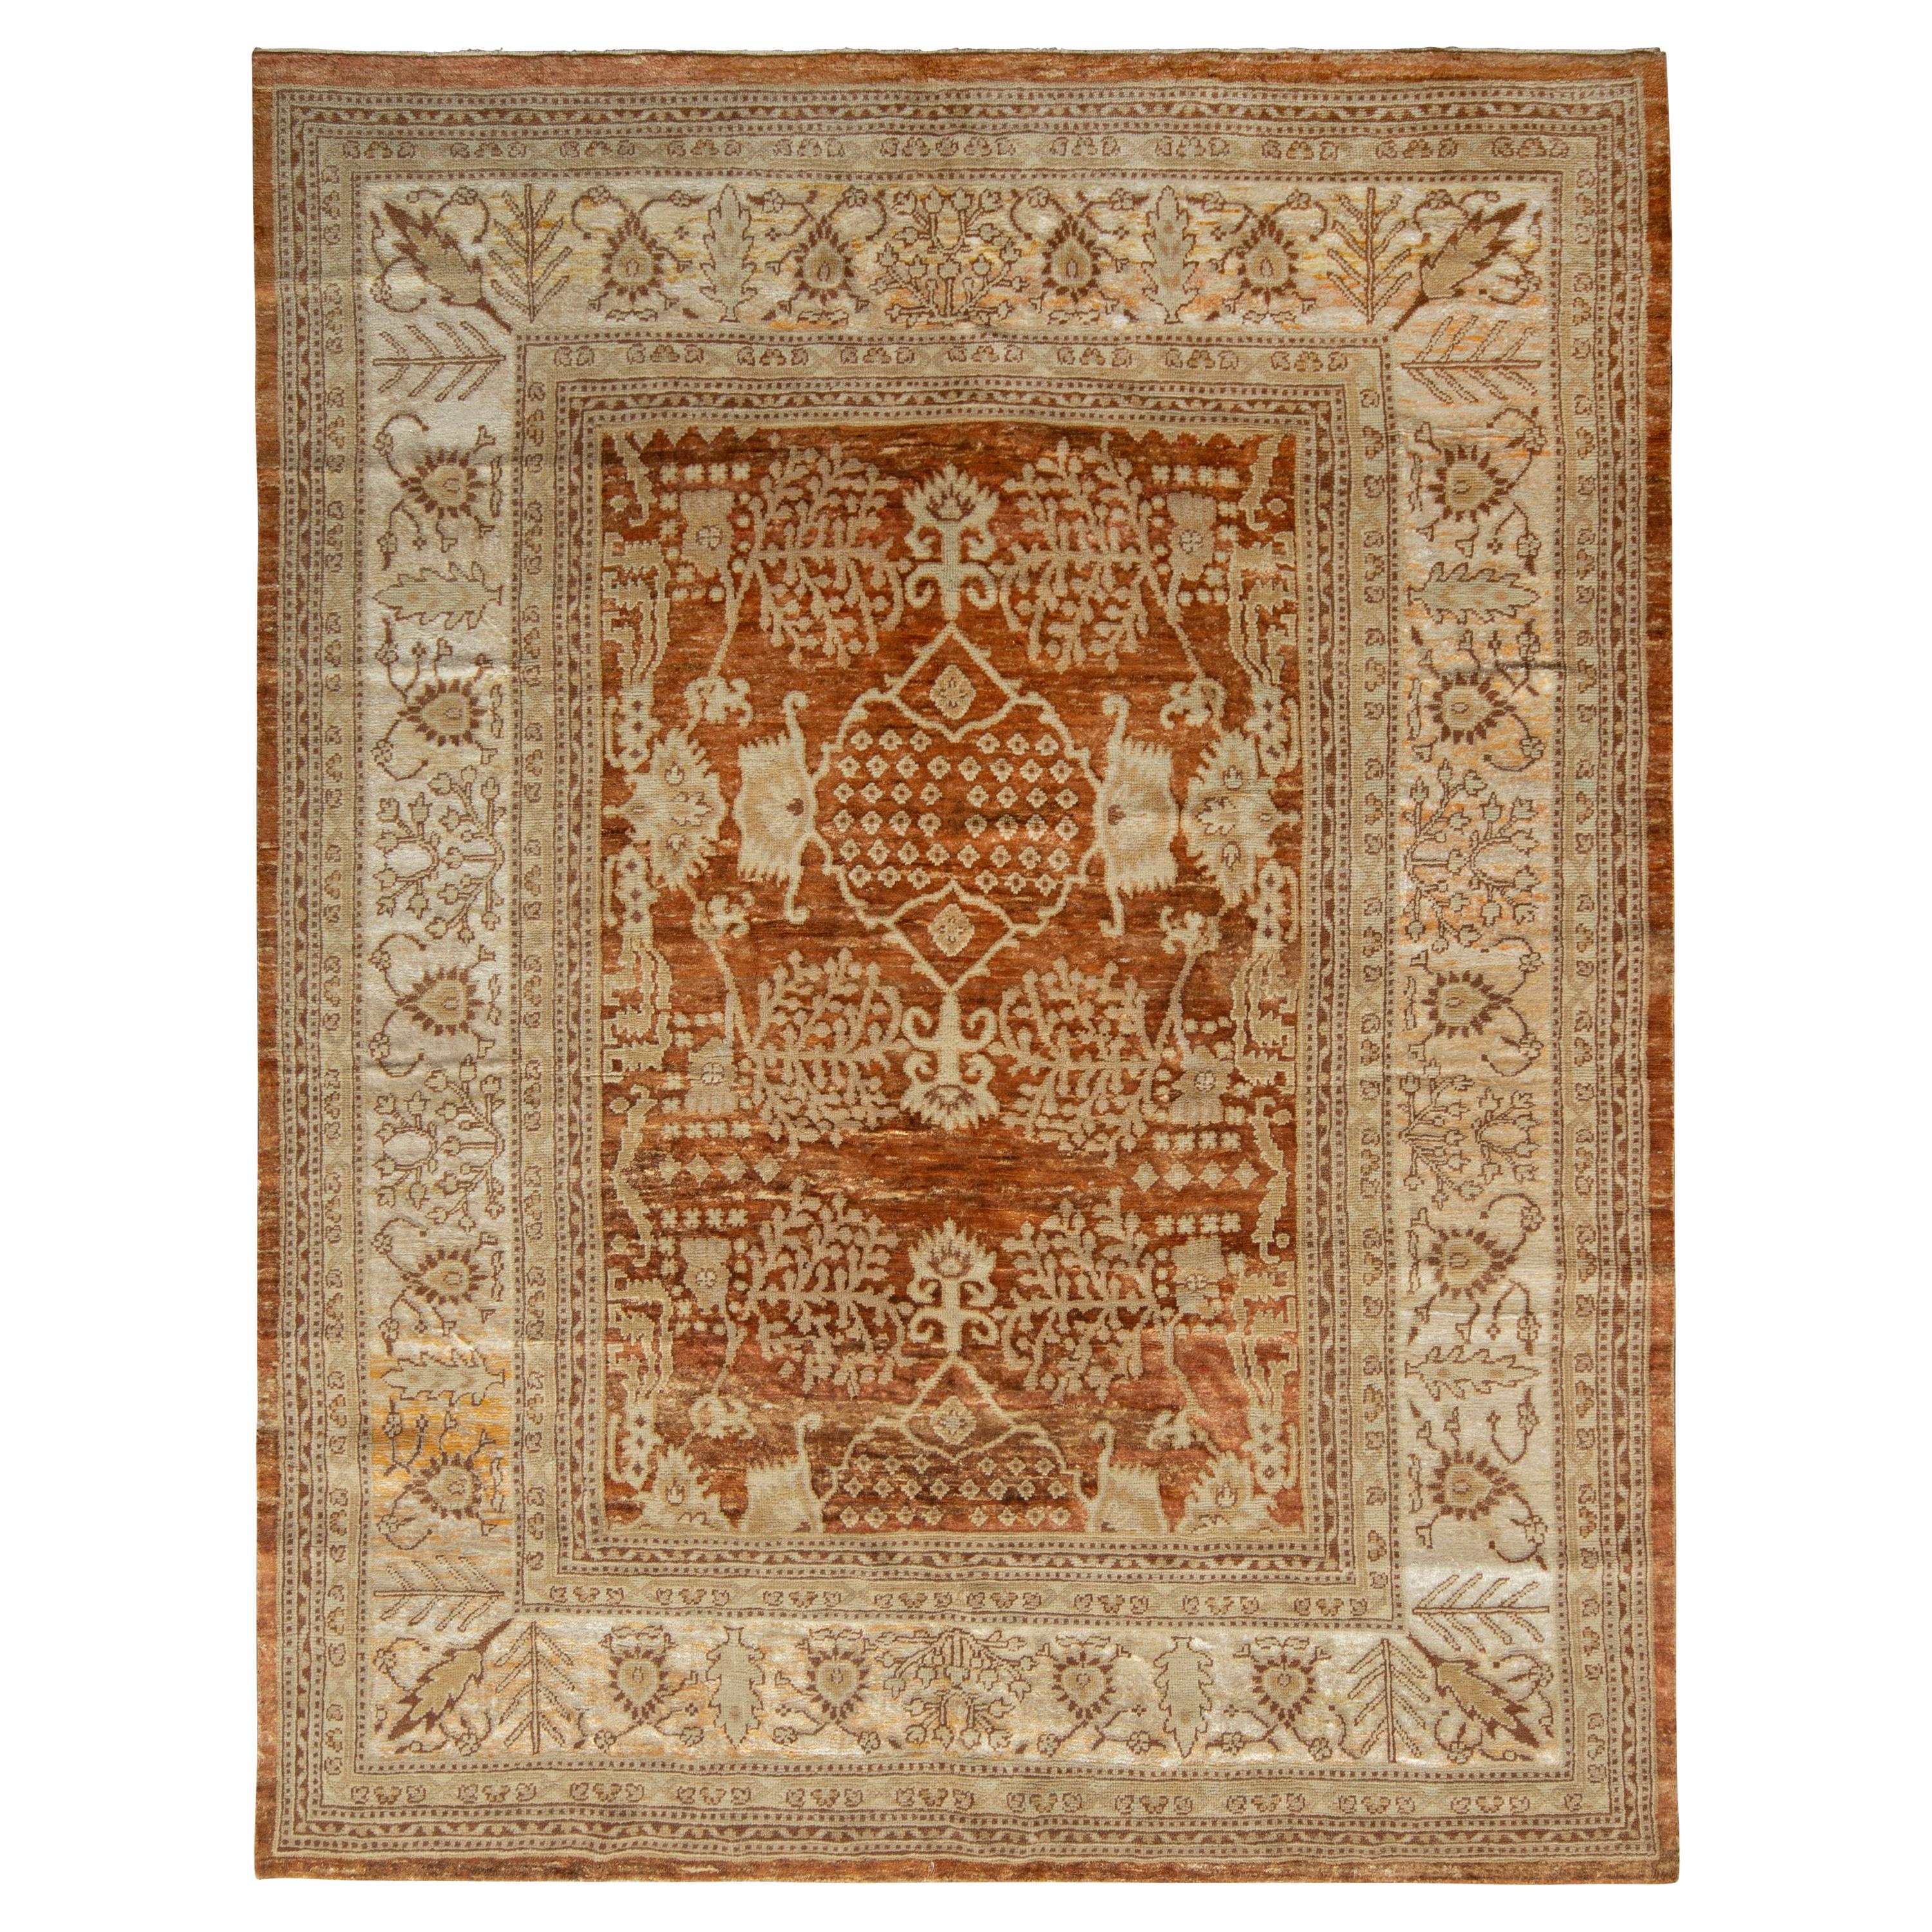 Rug & Kilim’s Classic Oushak Style Rug in Beige-Brown Floral Pattern